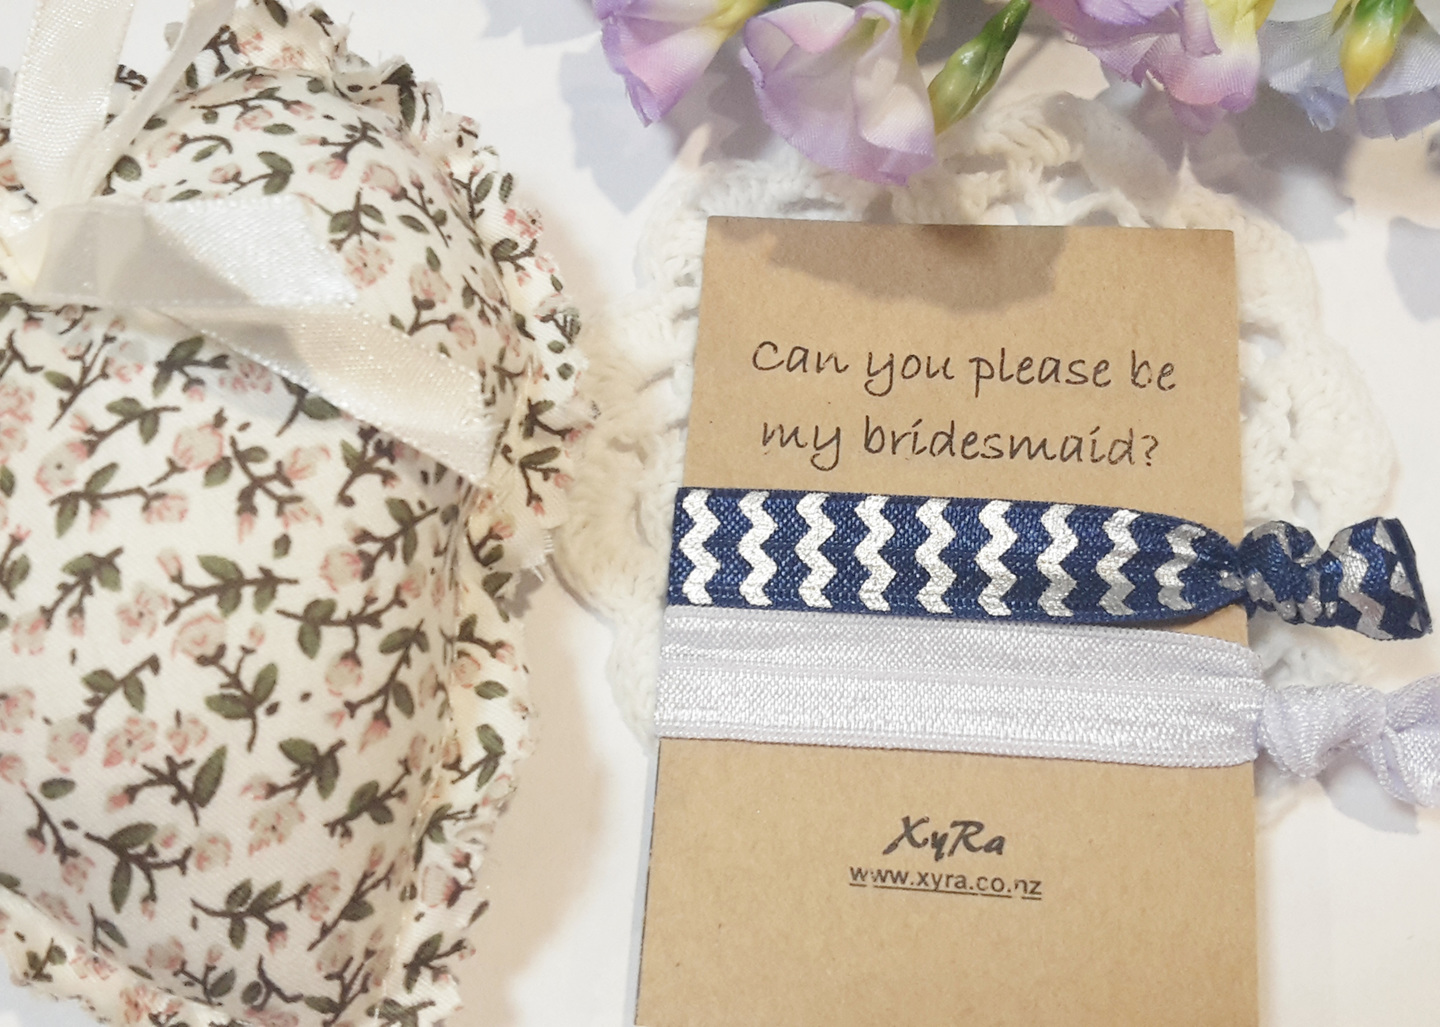 Looking for bridesmaids - you can do it with our hair ties with personalized message.